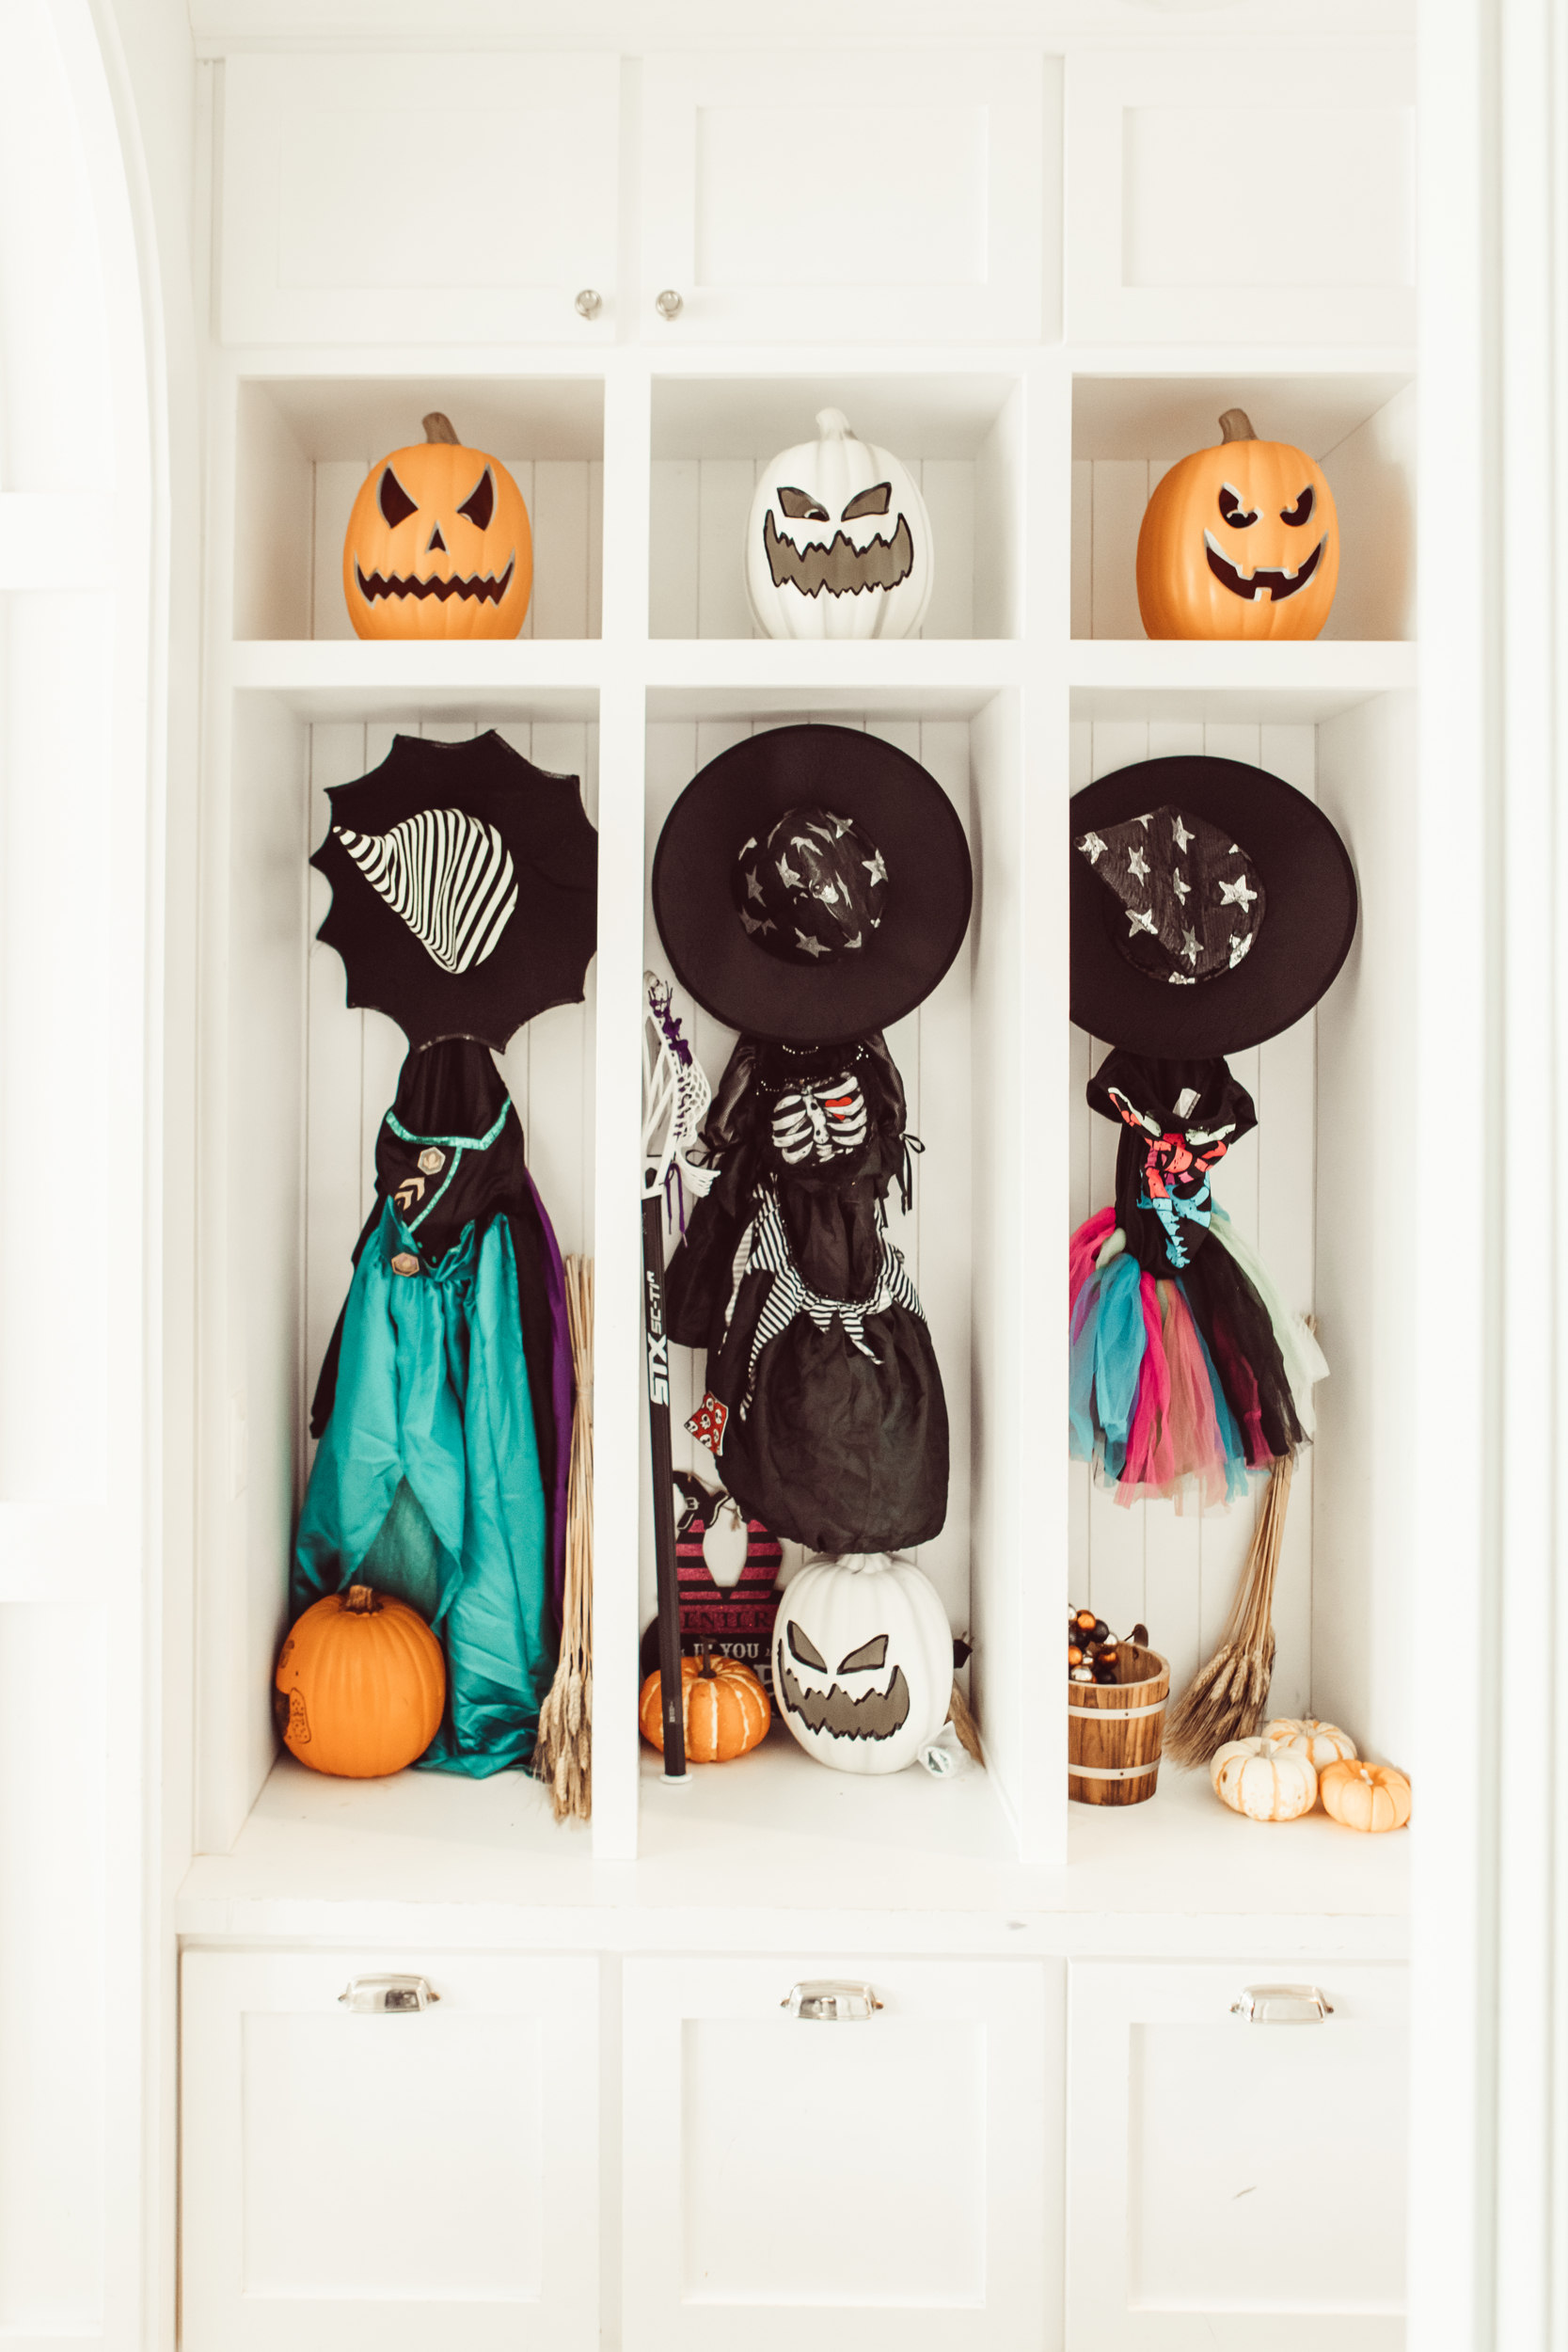 costumes hanging in cupboards